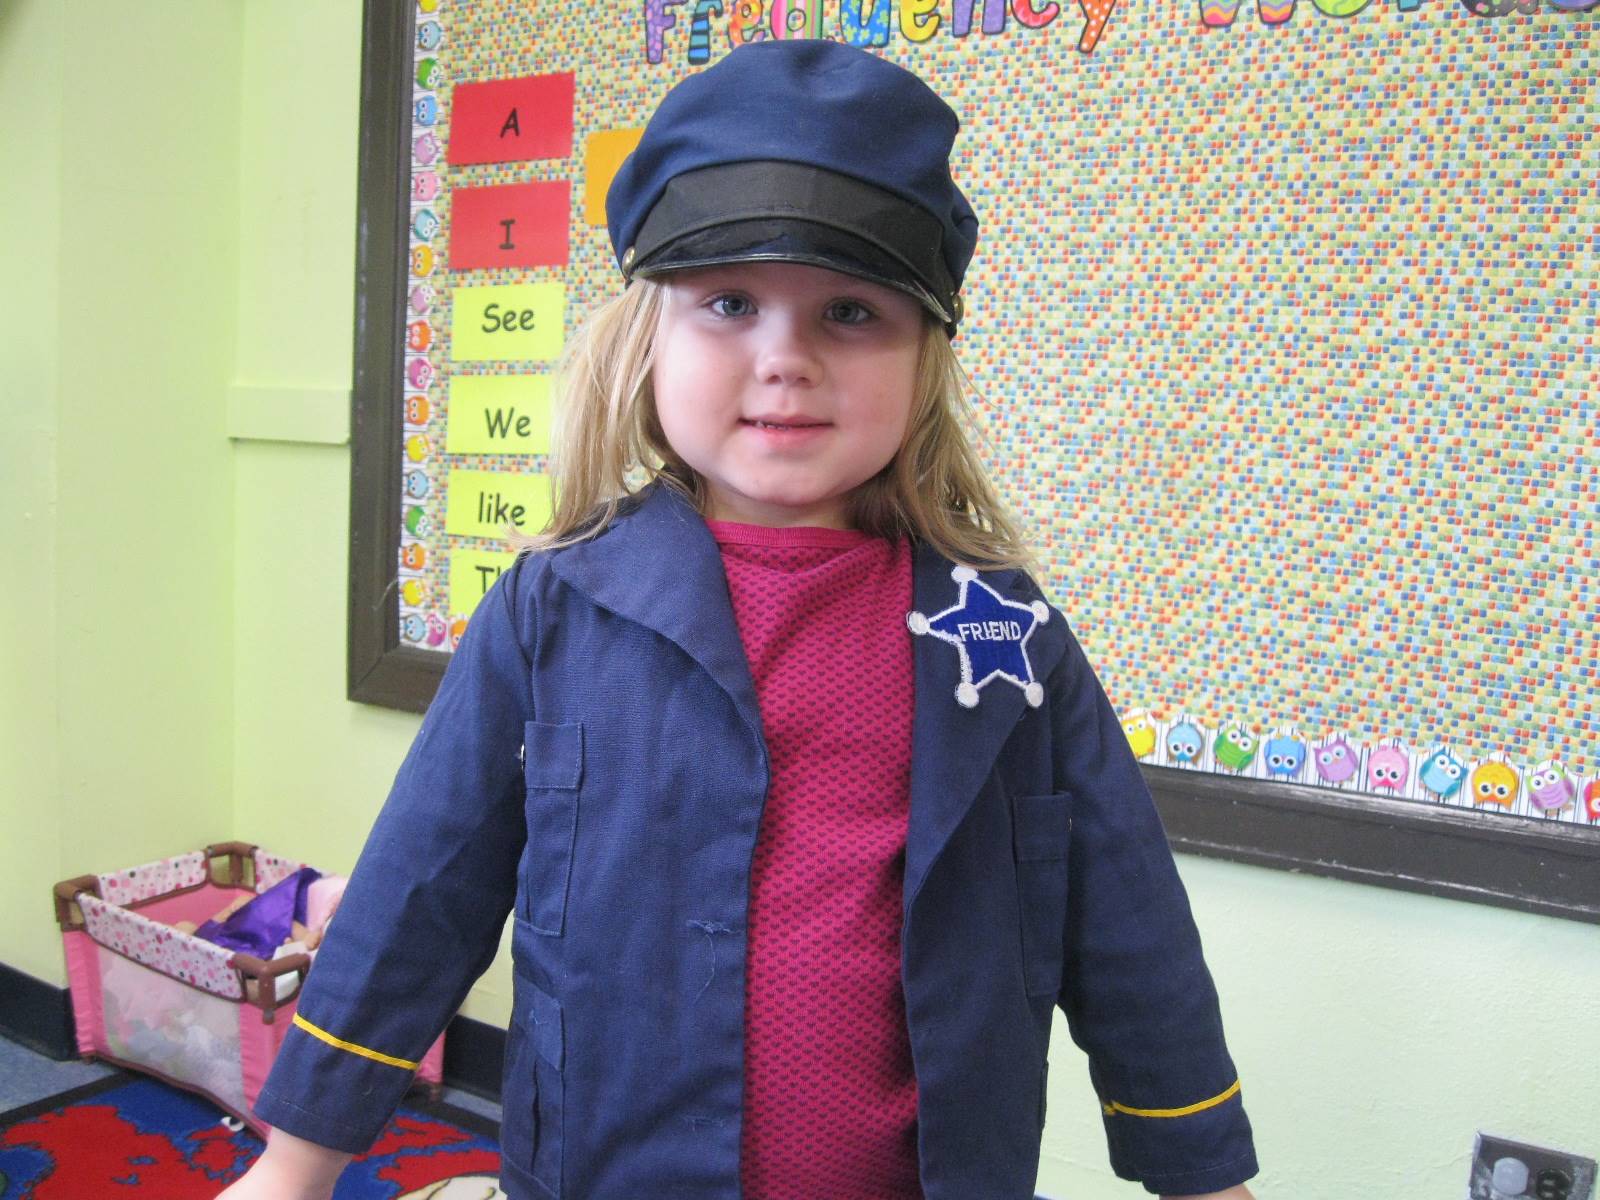 student dressed up as a police officer.